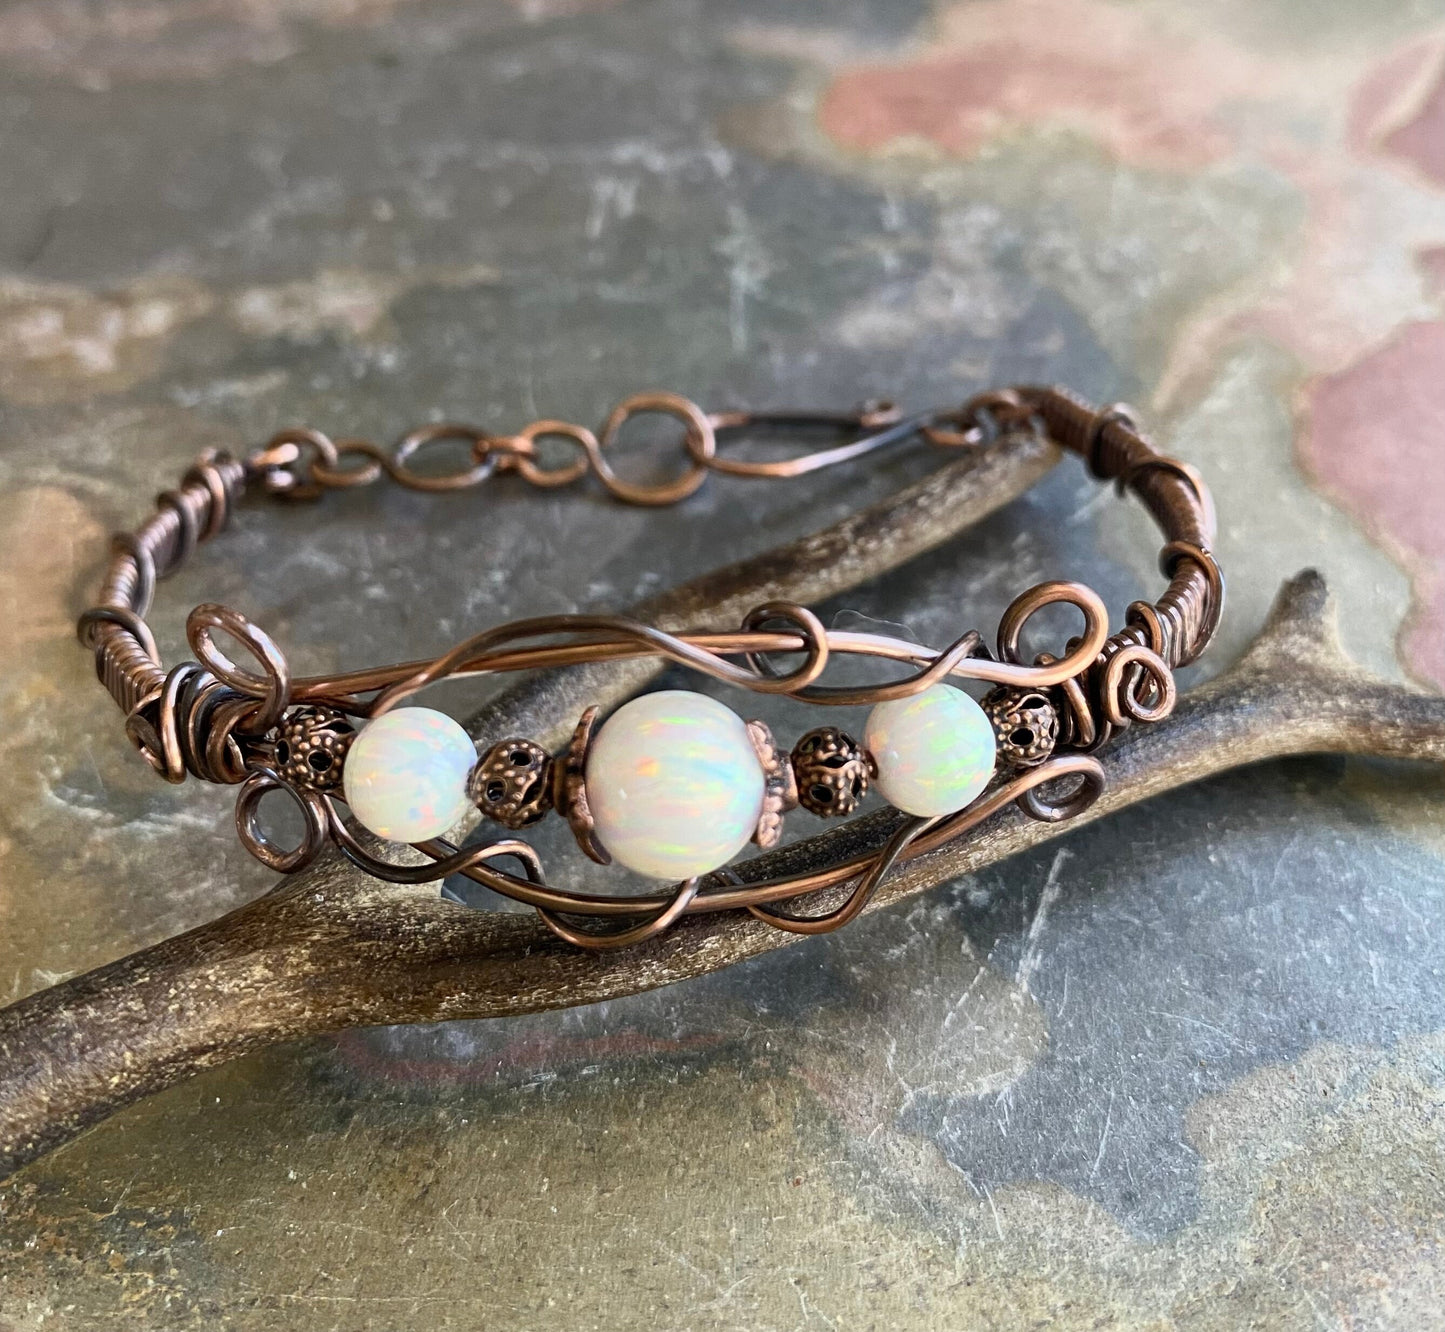 Wire Wrapped White Opal Bracelet  in Antiqued Copper, October Birthstone Bracelet Lab Created Opal cuff /Bangle Bracelet, Opal Bracelet